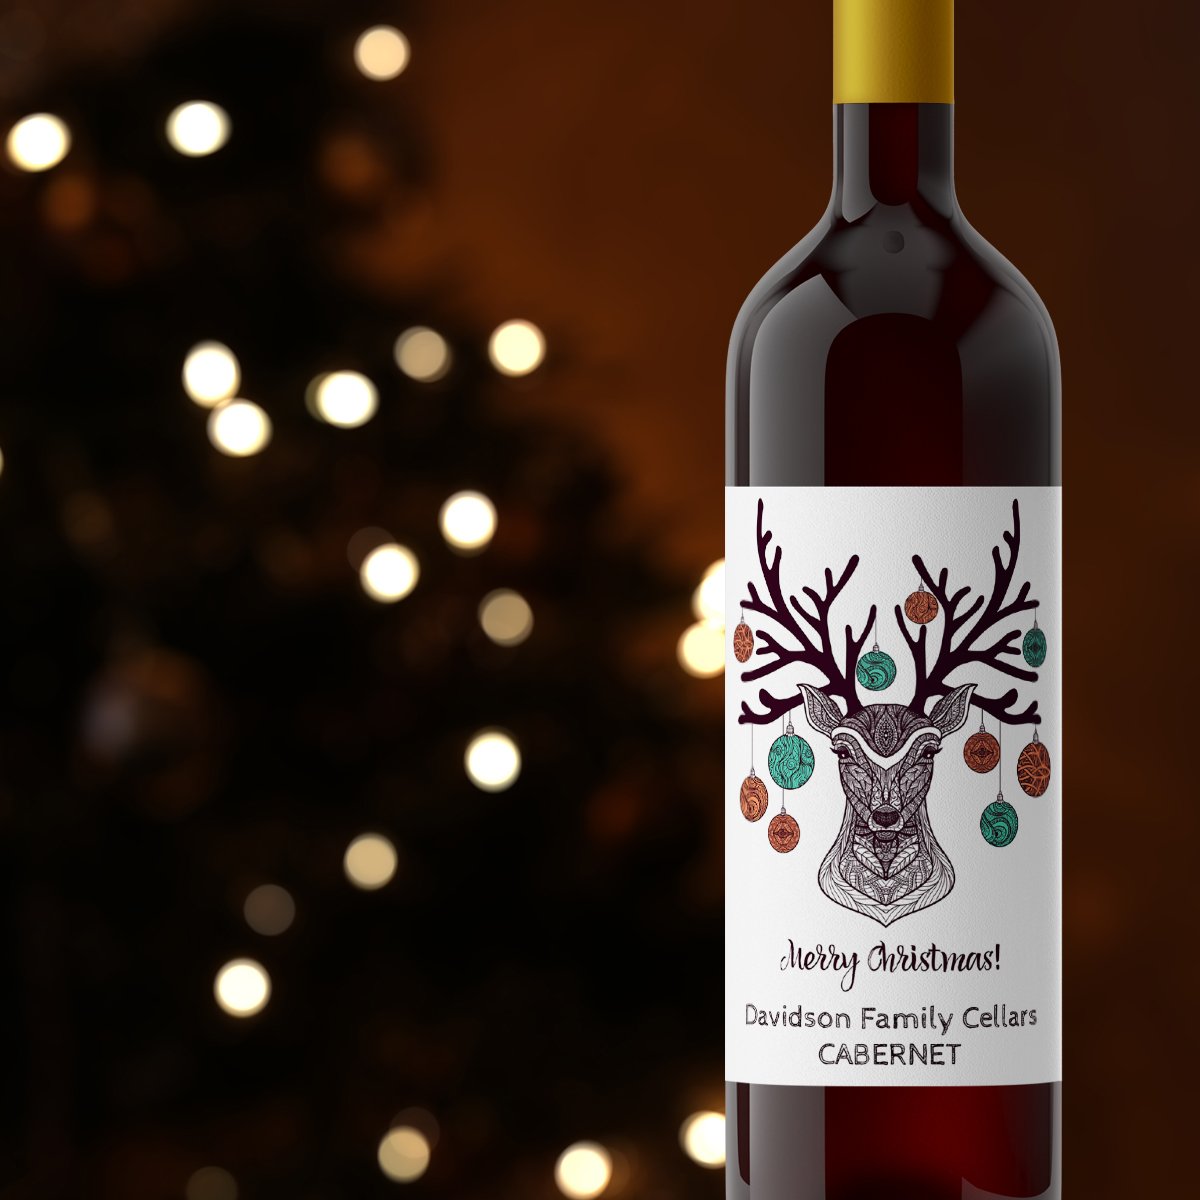 Christmas wine labels make inexpensive holiday gifts and great stocking stuffers.